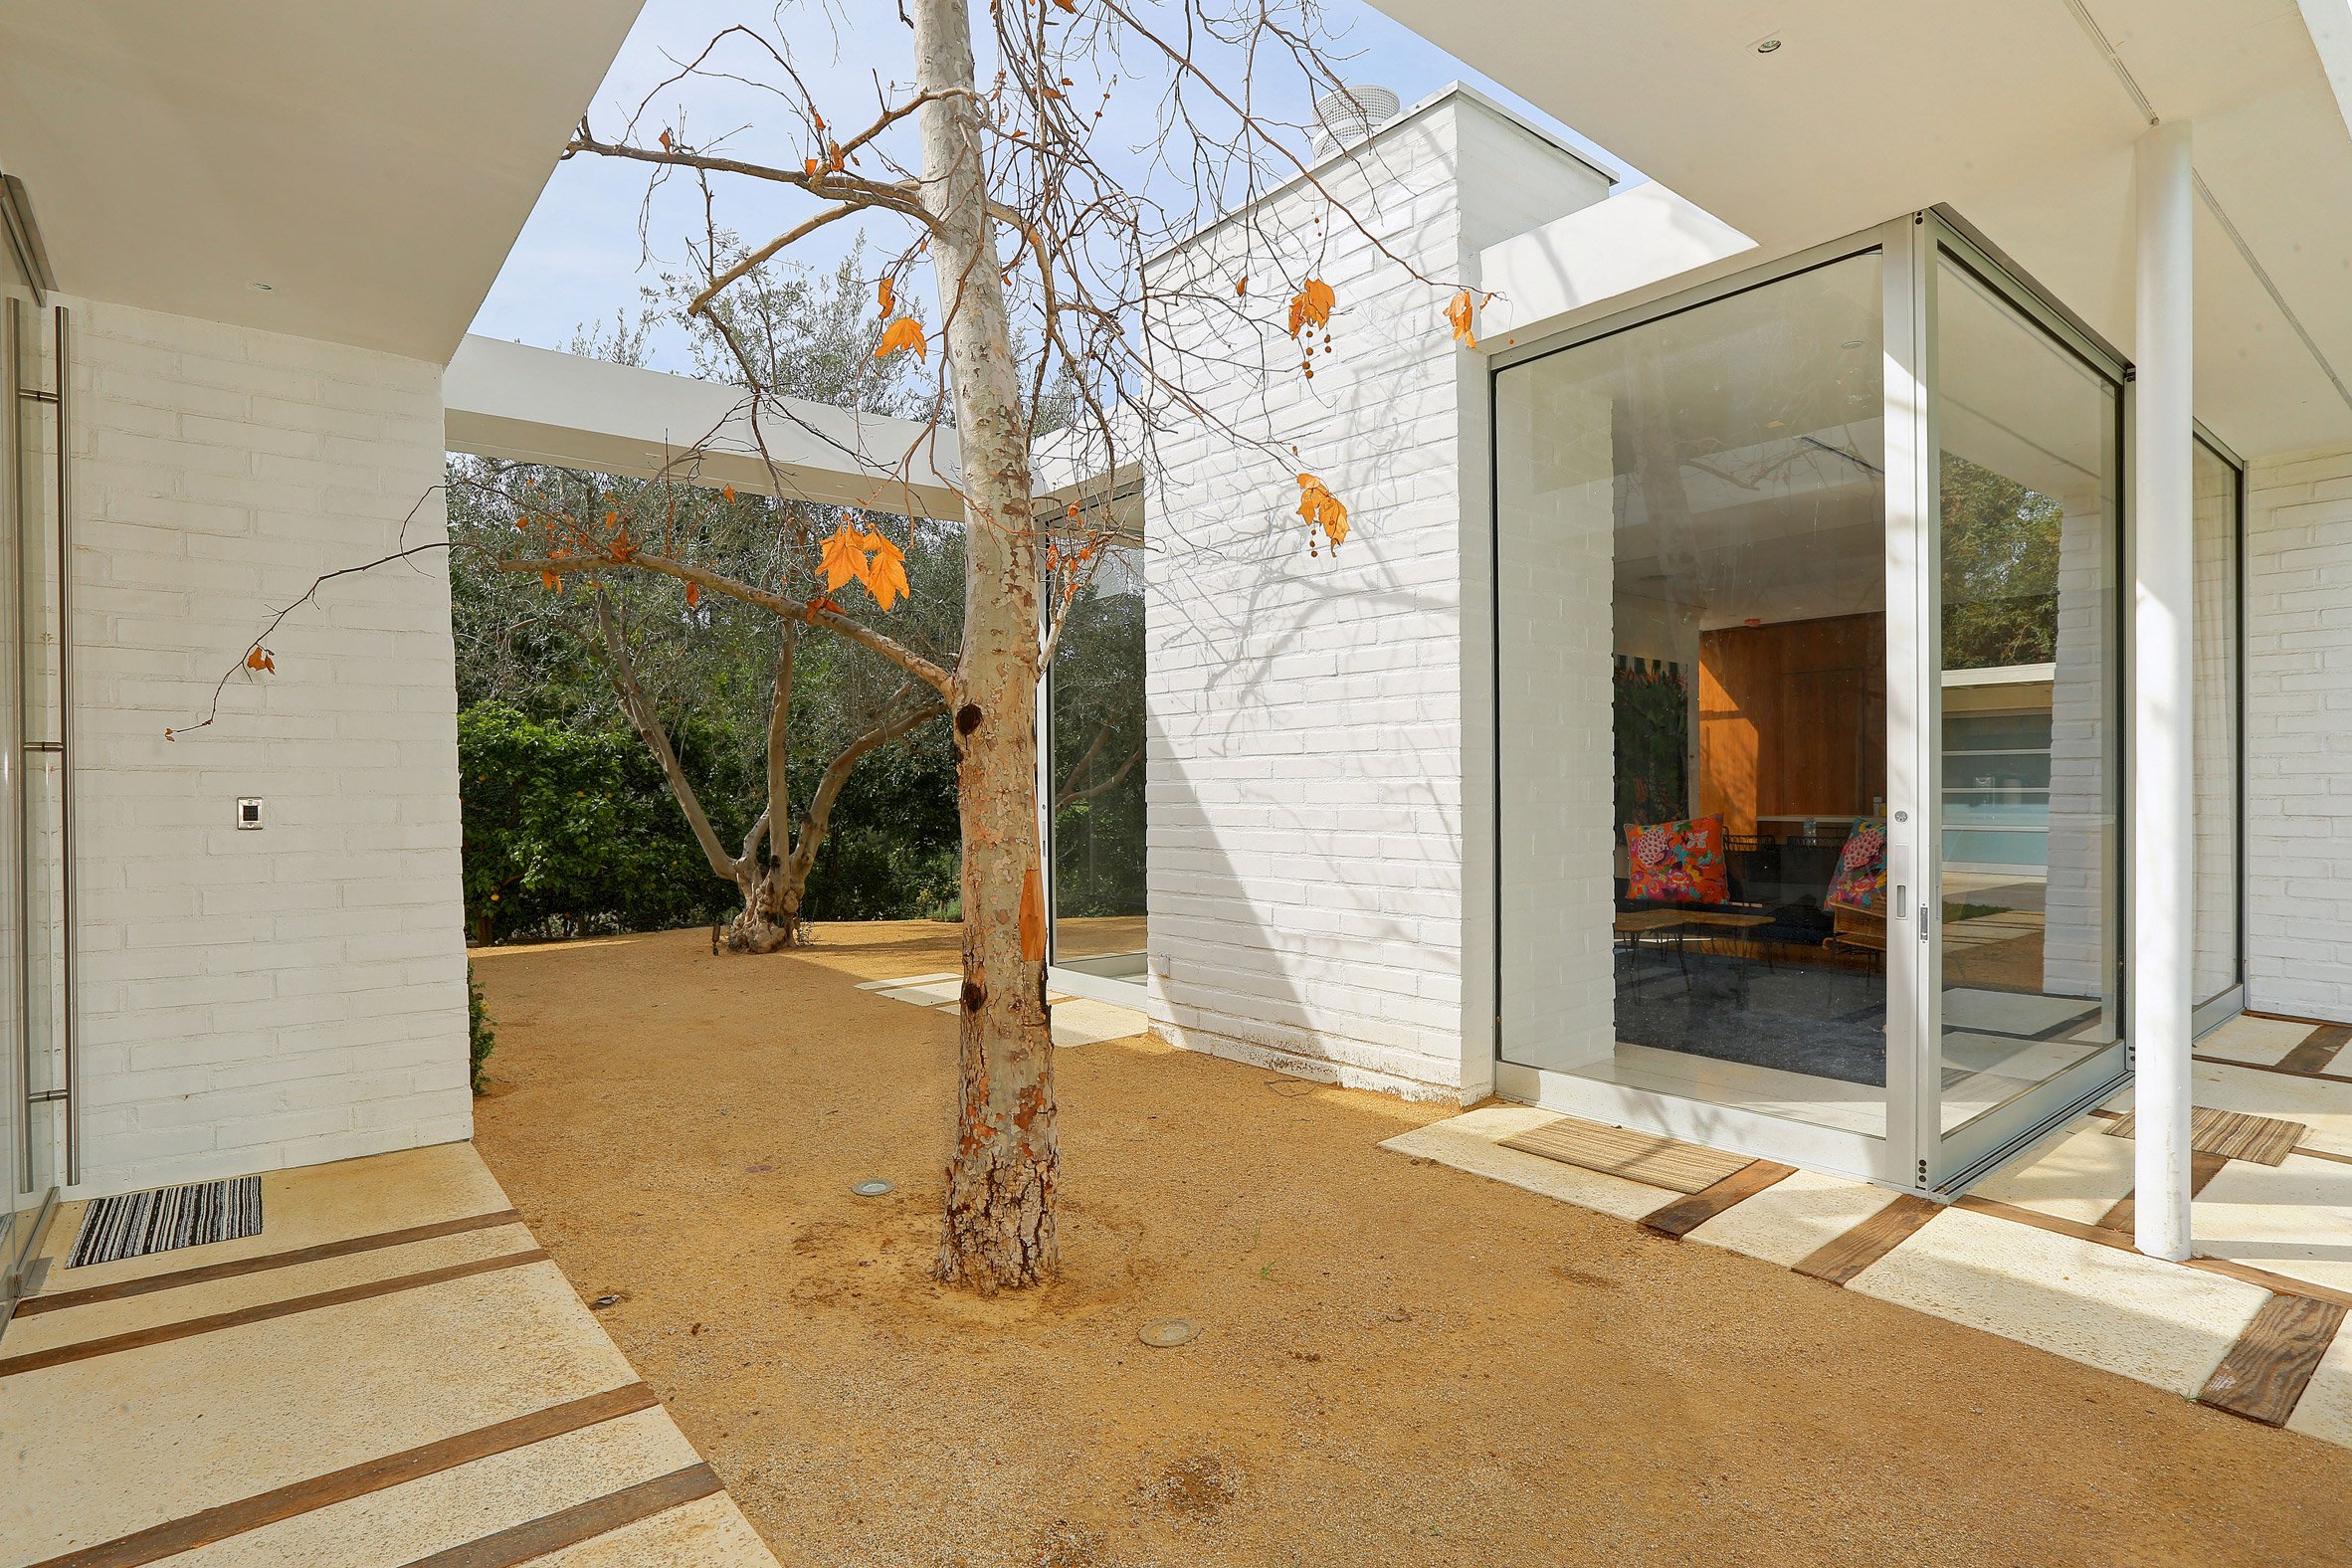 The house opens interiors to outdoors, it brings surroundings in